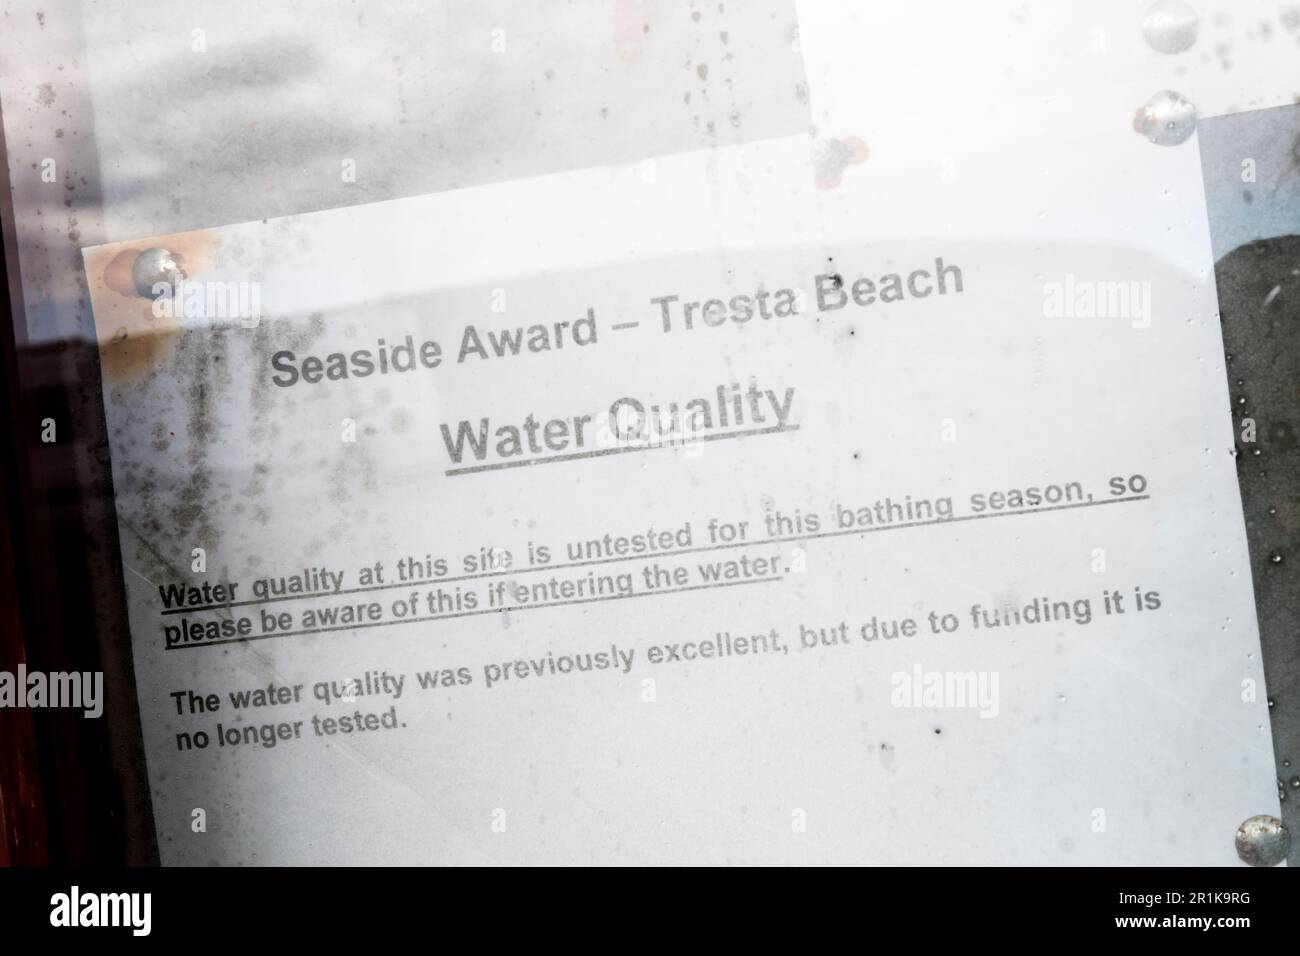 A notice at Tresta beach on Fetlar, Shetland, warns that the water quality is no longer tested because of lack of funds. Stock Photo